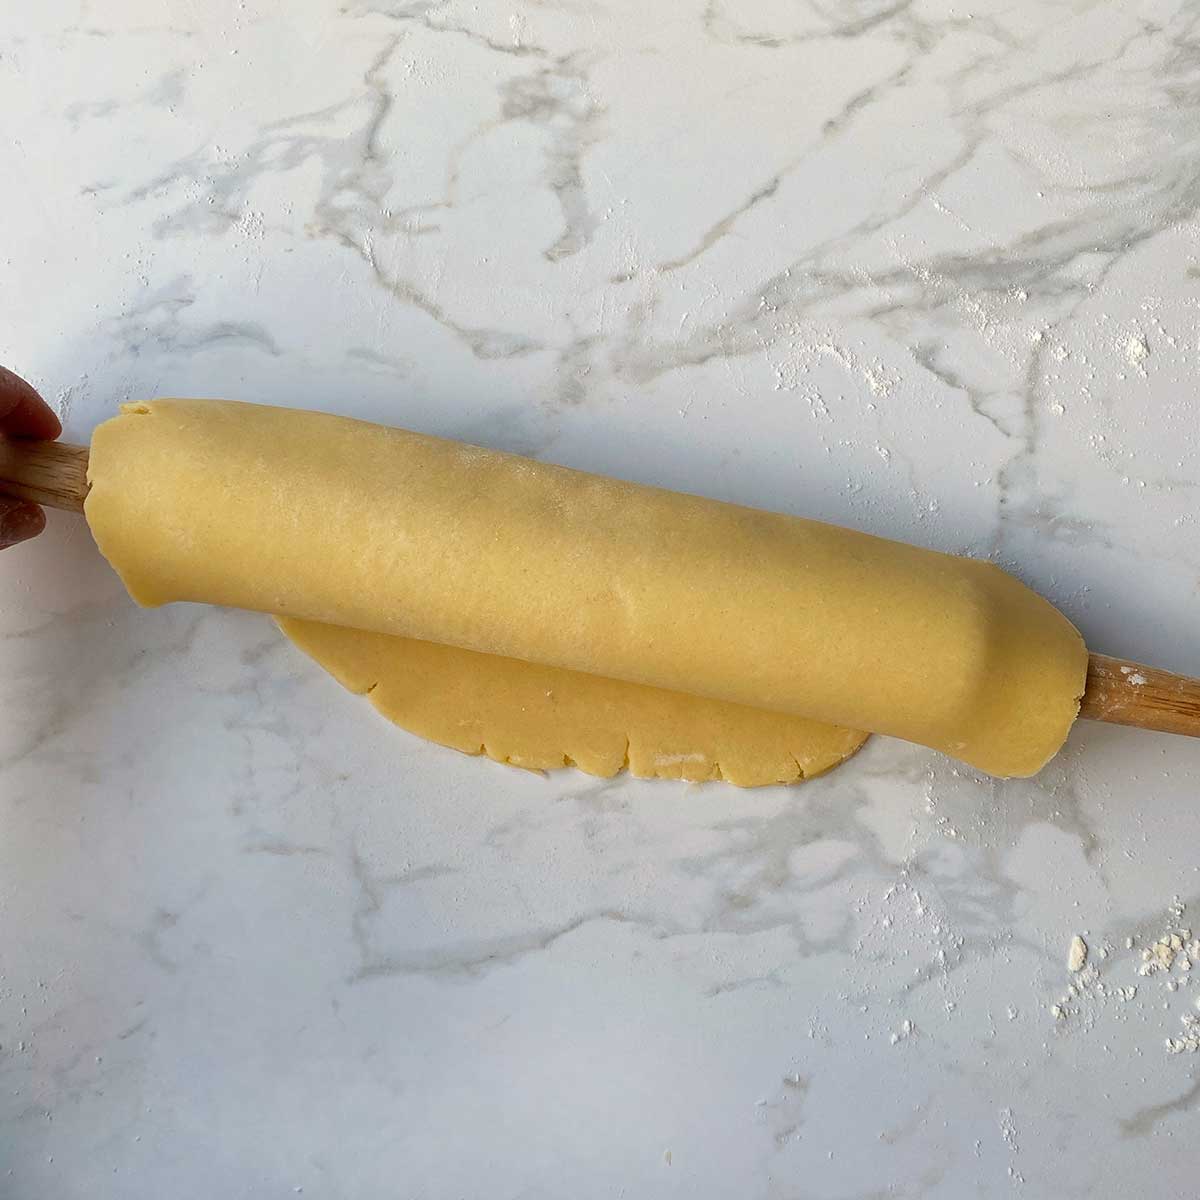 Rolled pastry draped over a rolling pin on a white bench.